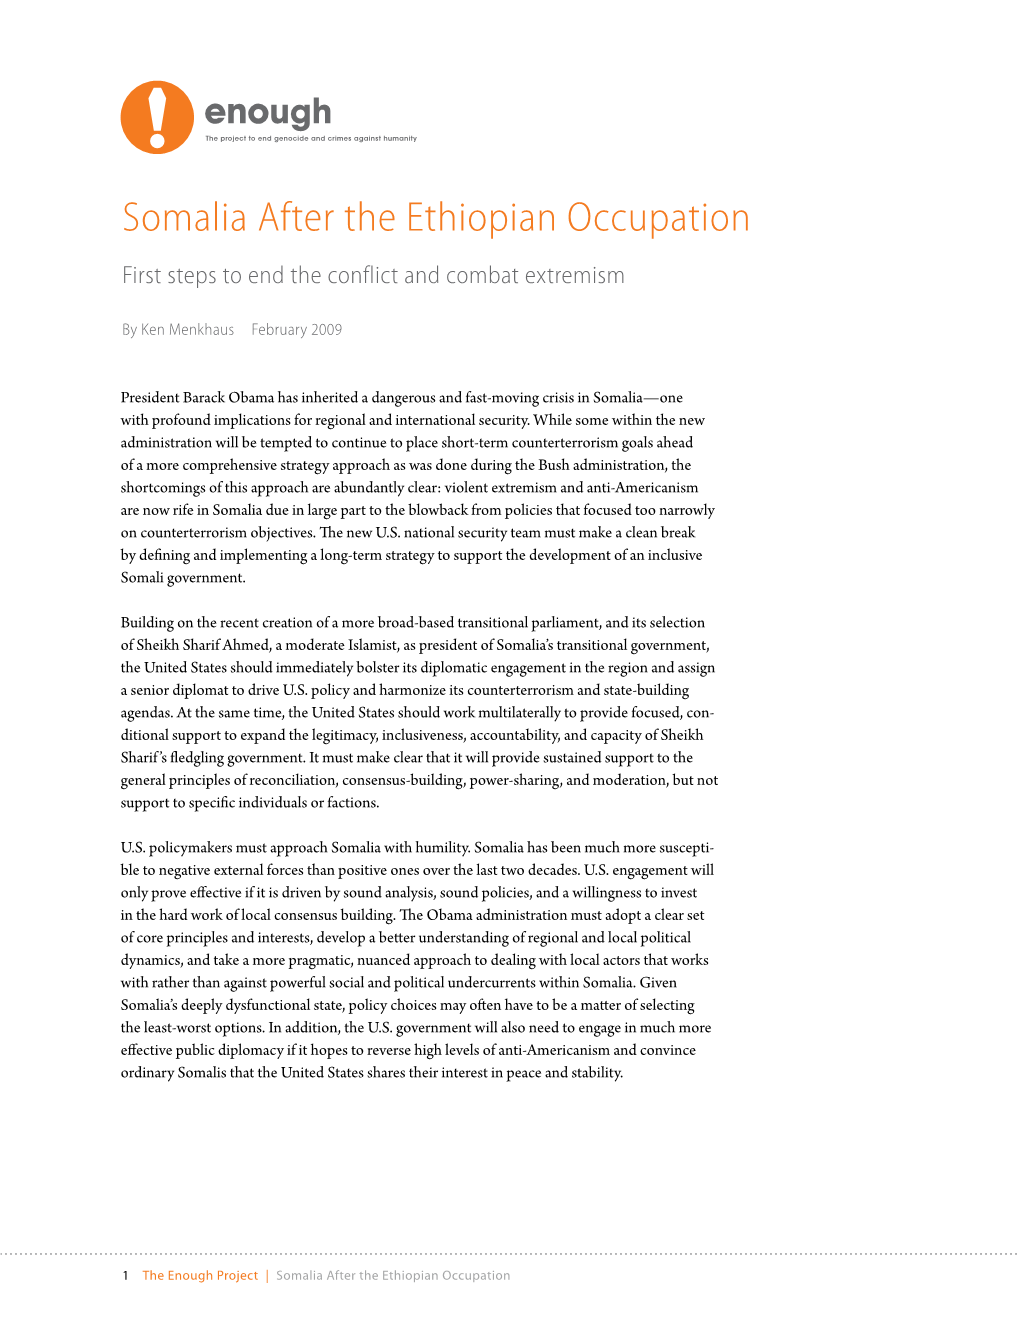 Somalia After the Ethiopian Occupation First Steps to End the Conflict and Combat Extremism